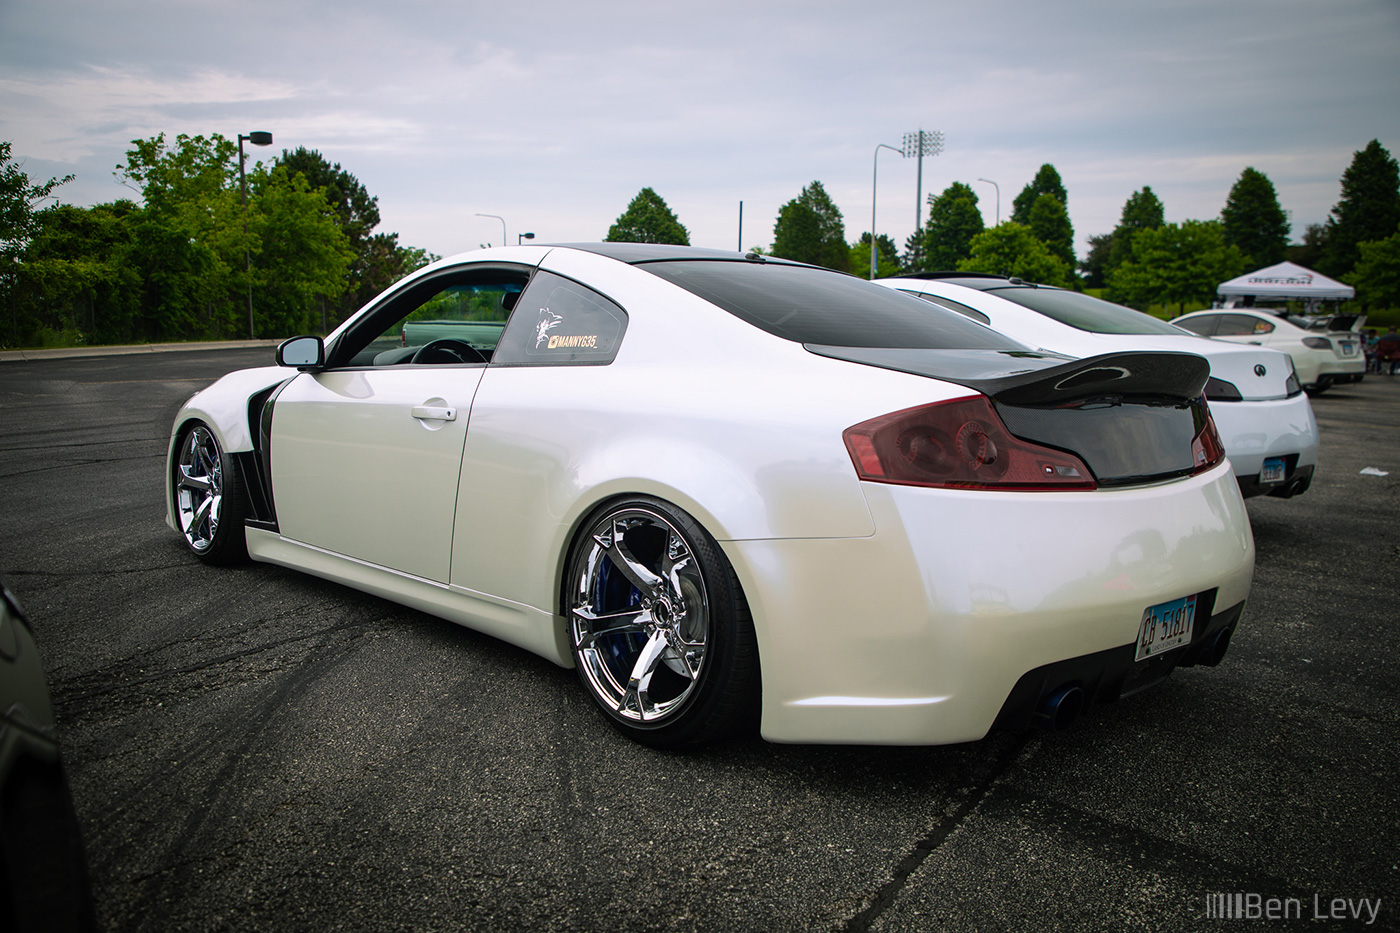 Rear Quarter of Clean Infiniti G35 Coupe in White